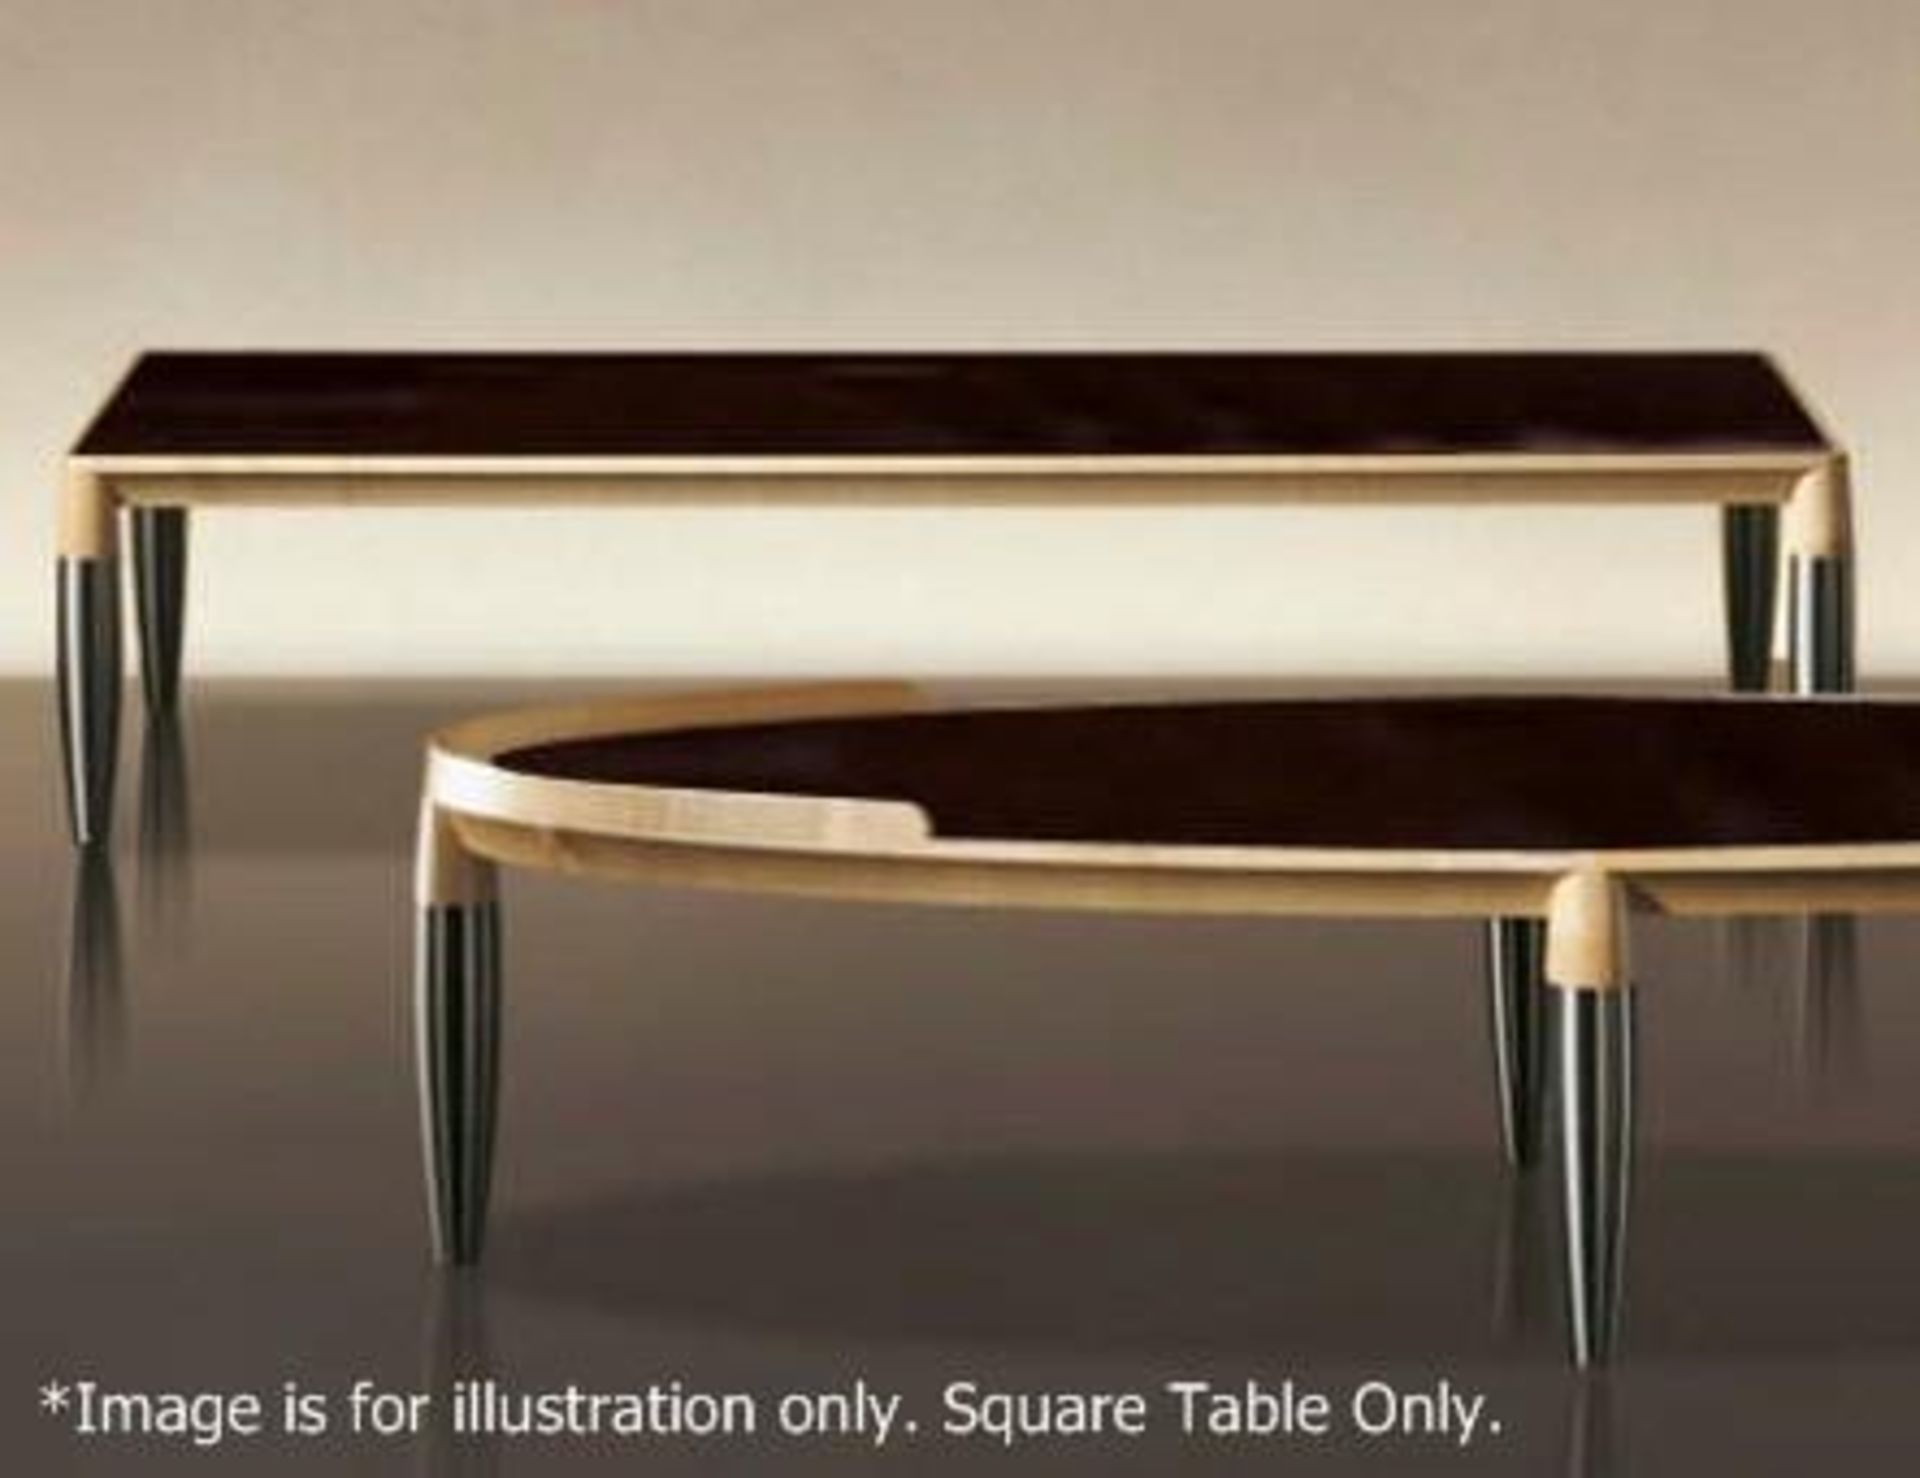 GIORGETTI "Roi" Low SQUARE Coffee Table - Features A Tinted Glass Top And Solid Maple Base - Dimensi